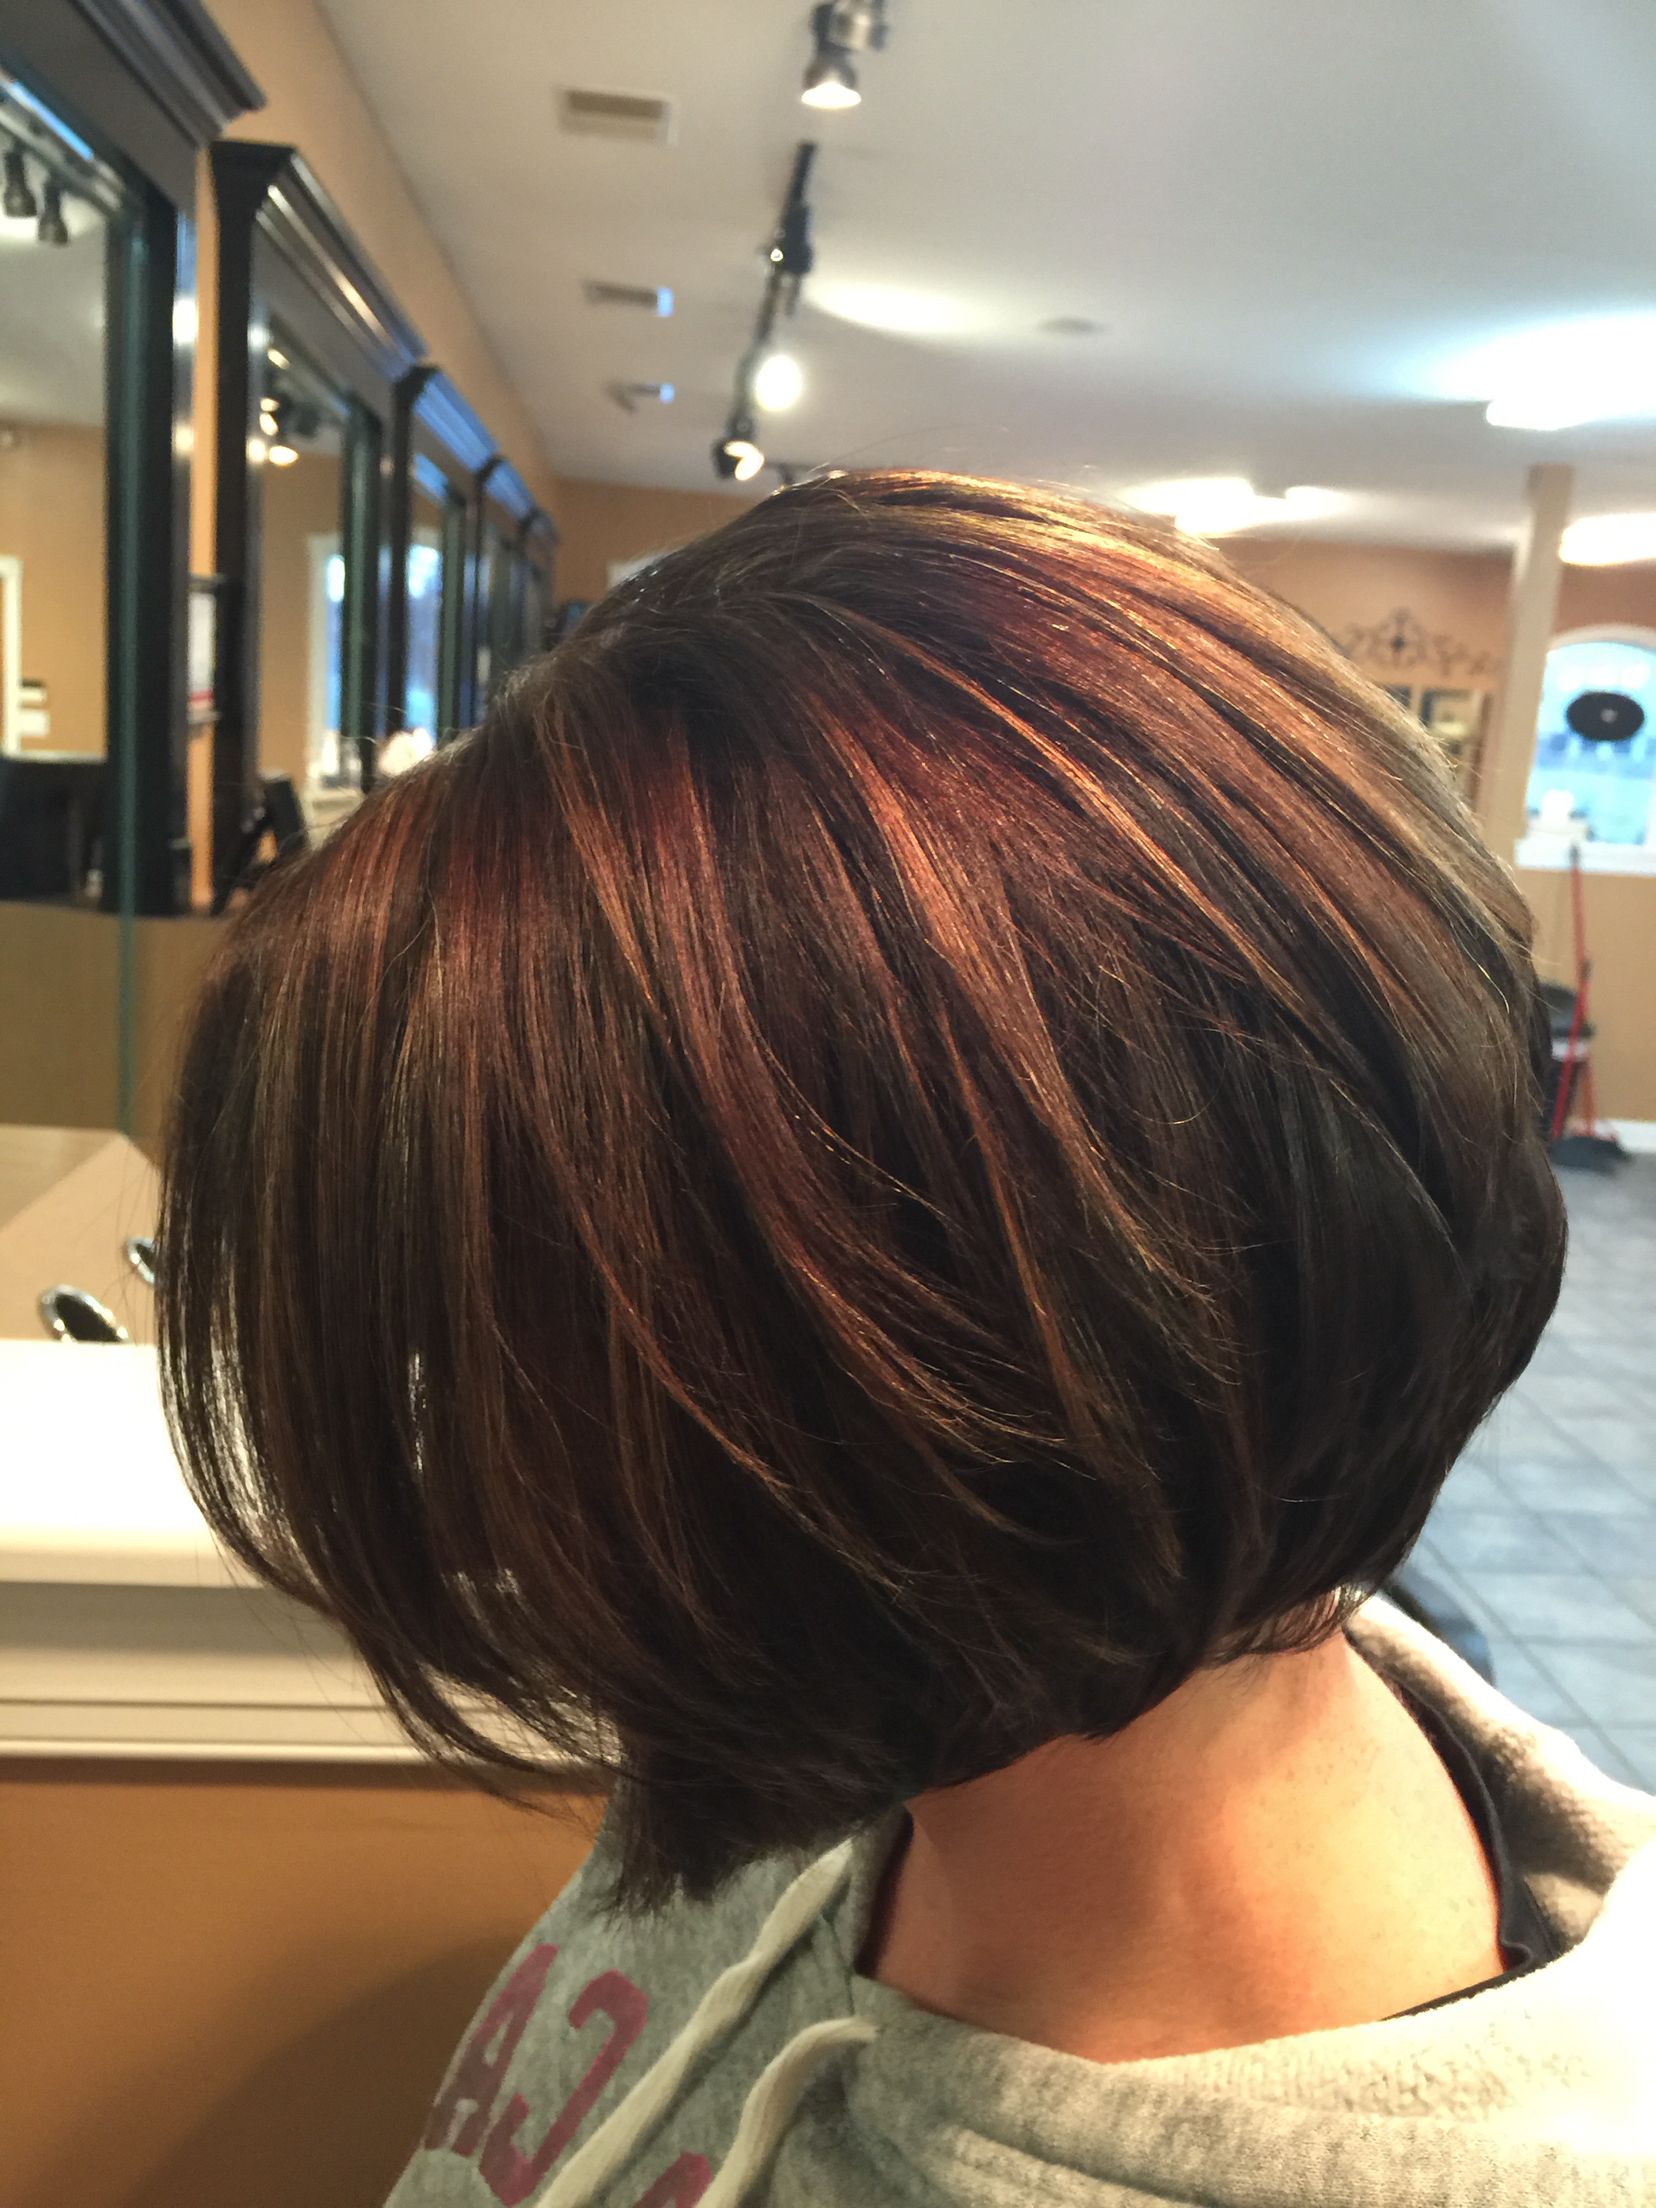 Captivating Caramel Bob Hairstyles On Inverted Bob Chocolate Brown Within Short Curly Caramel Brown Bob Hairstyles (View 15 of 25)